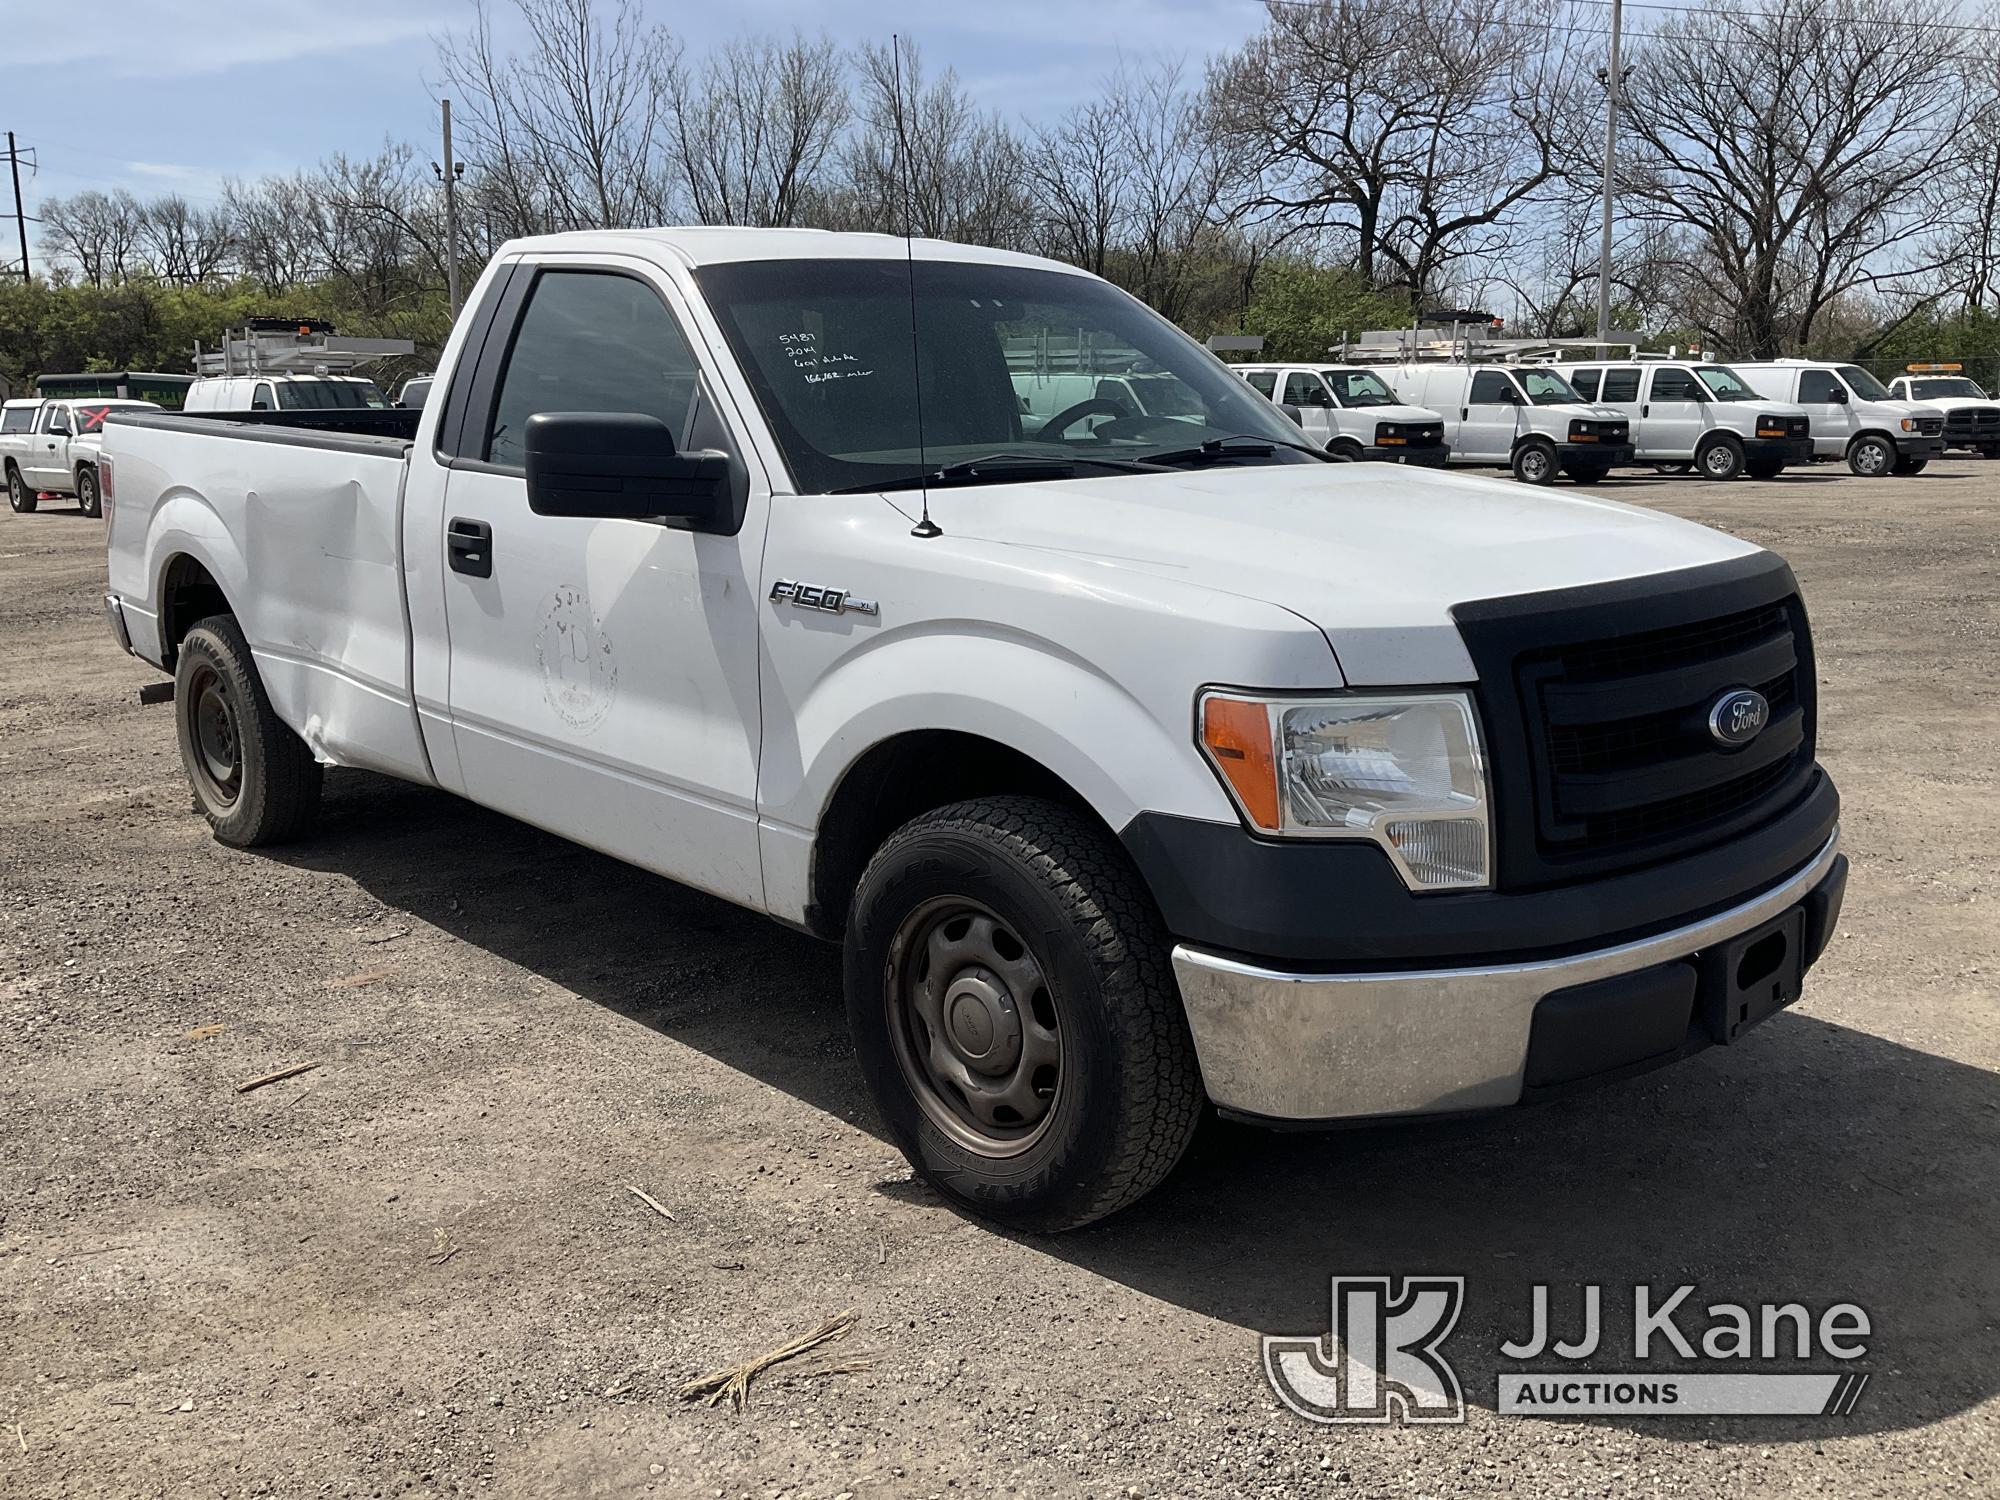 (Plymouth Meeting, PA) 2014 Ford F150 Pickup Truck Runs & Moves, Body & Rust Damage